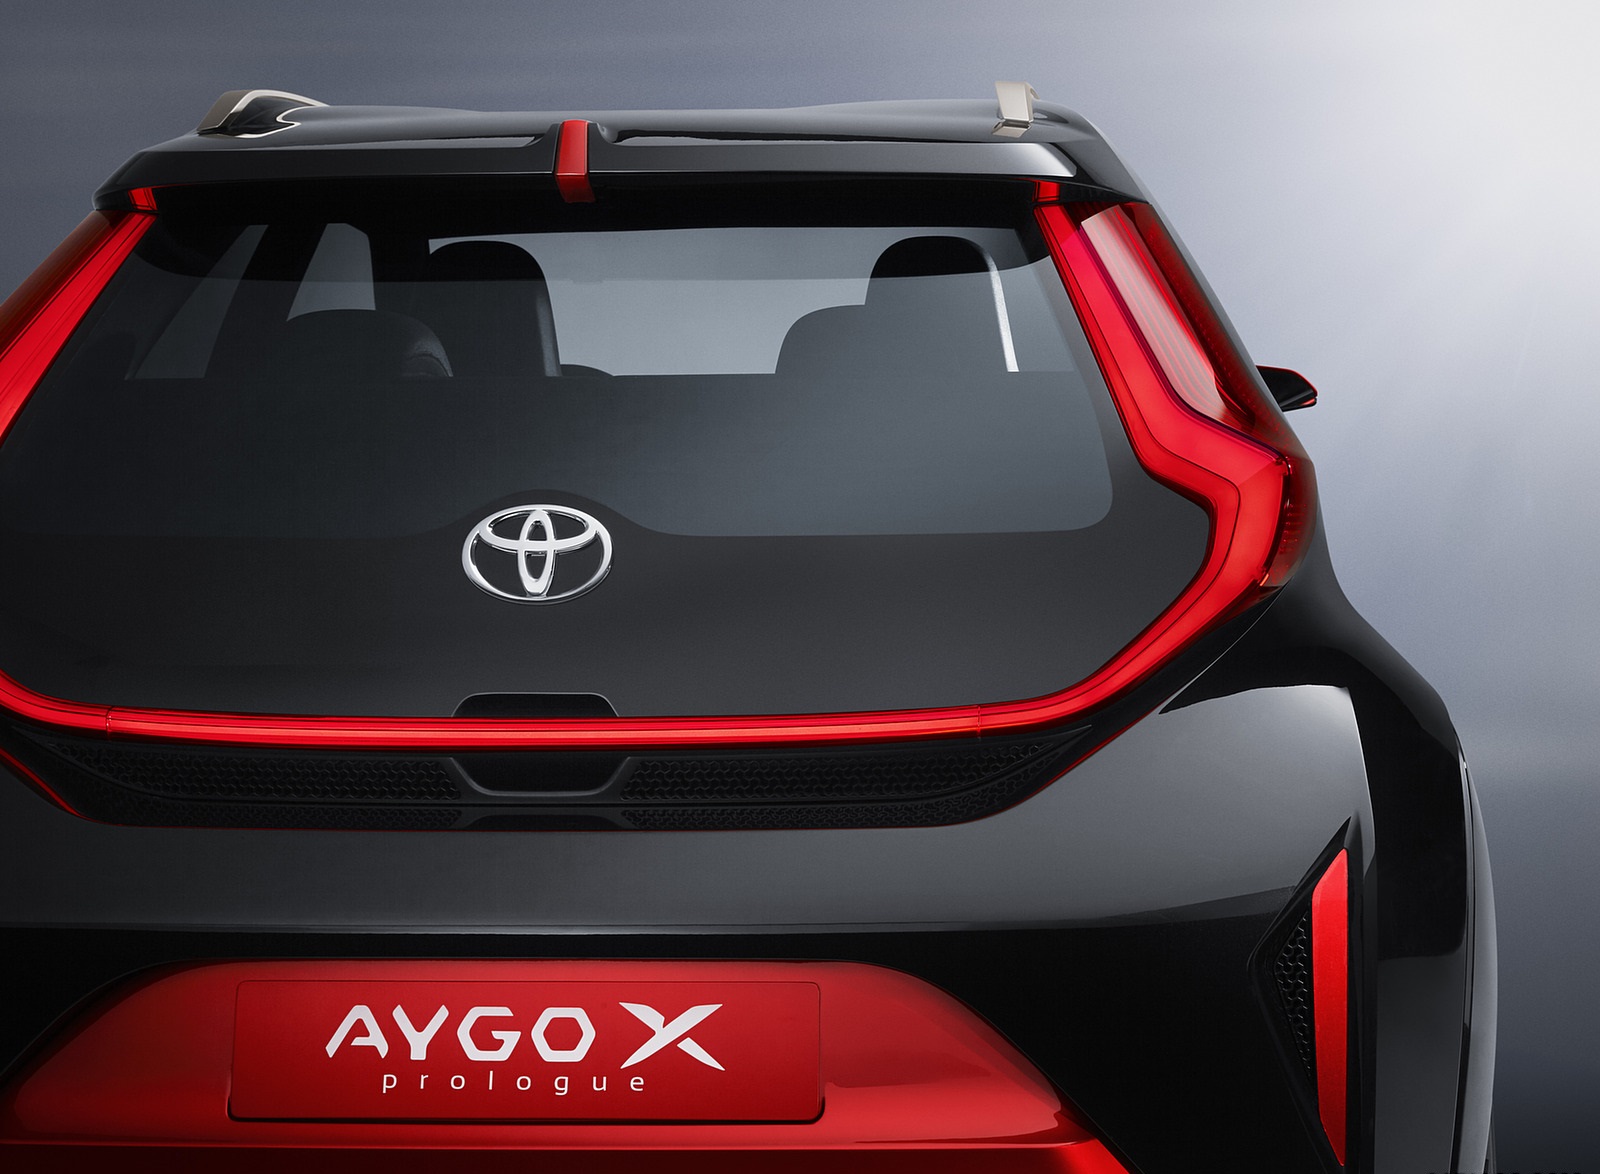 2021 Toyota Aygo X Prologue Concept Detail Wallpapers #32 of 37